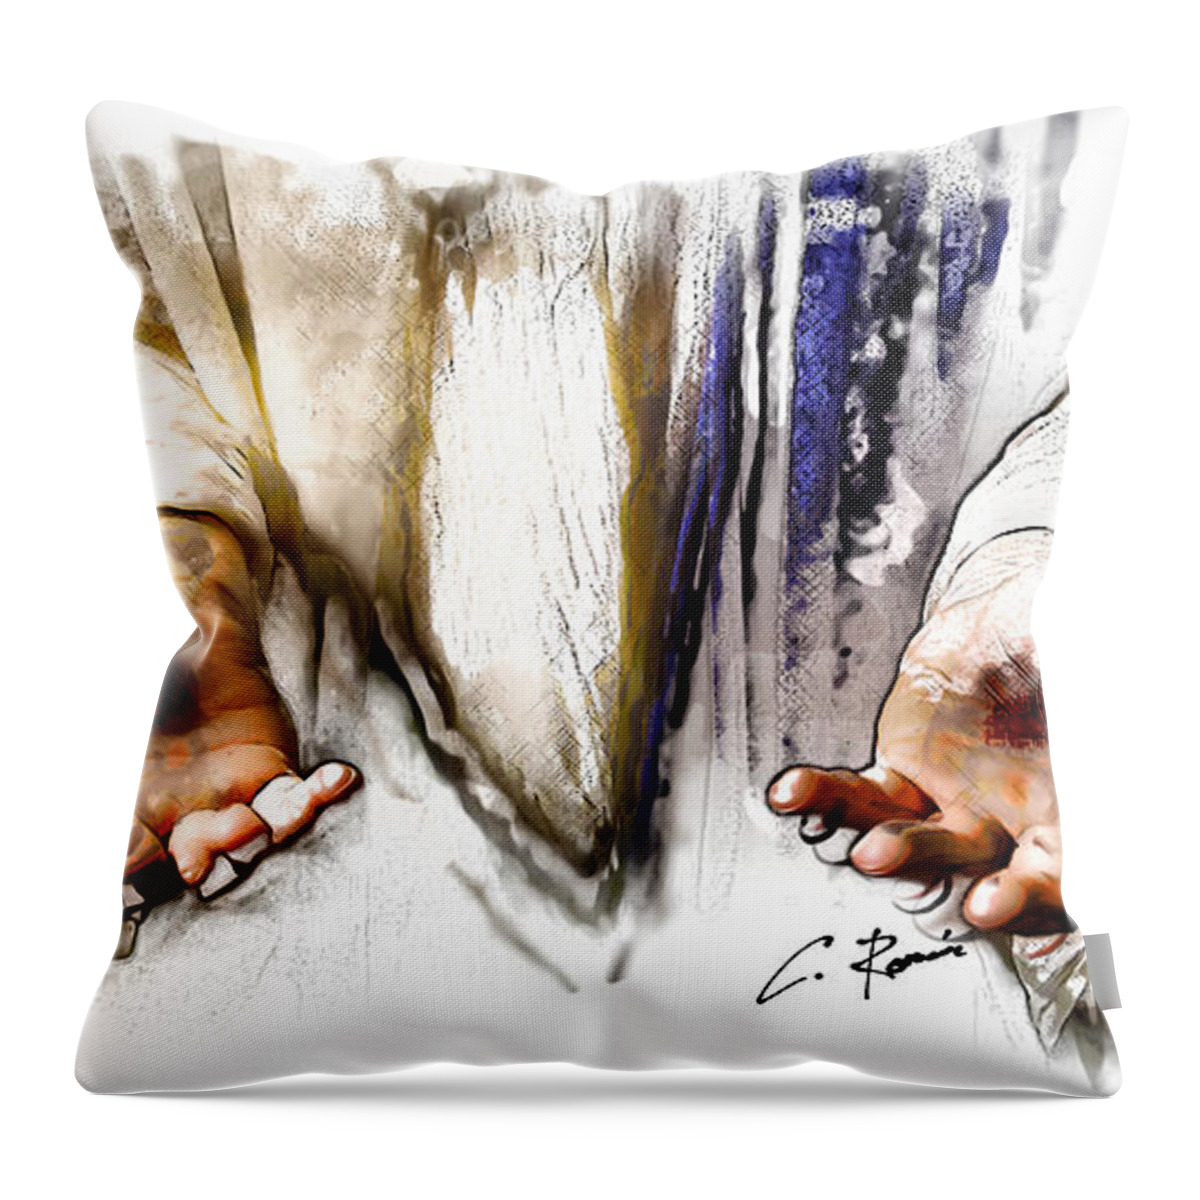 Proof Throw Pillow featuring the painting The Proof by Charlie Roman